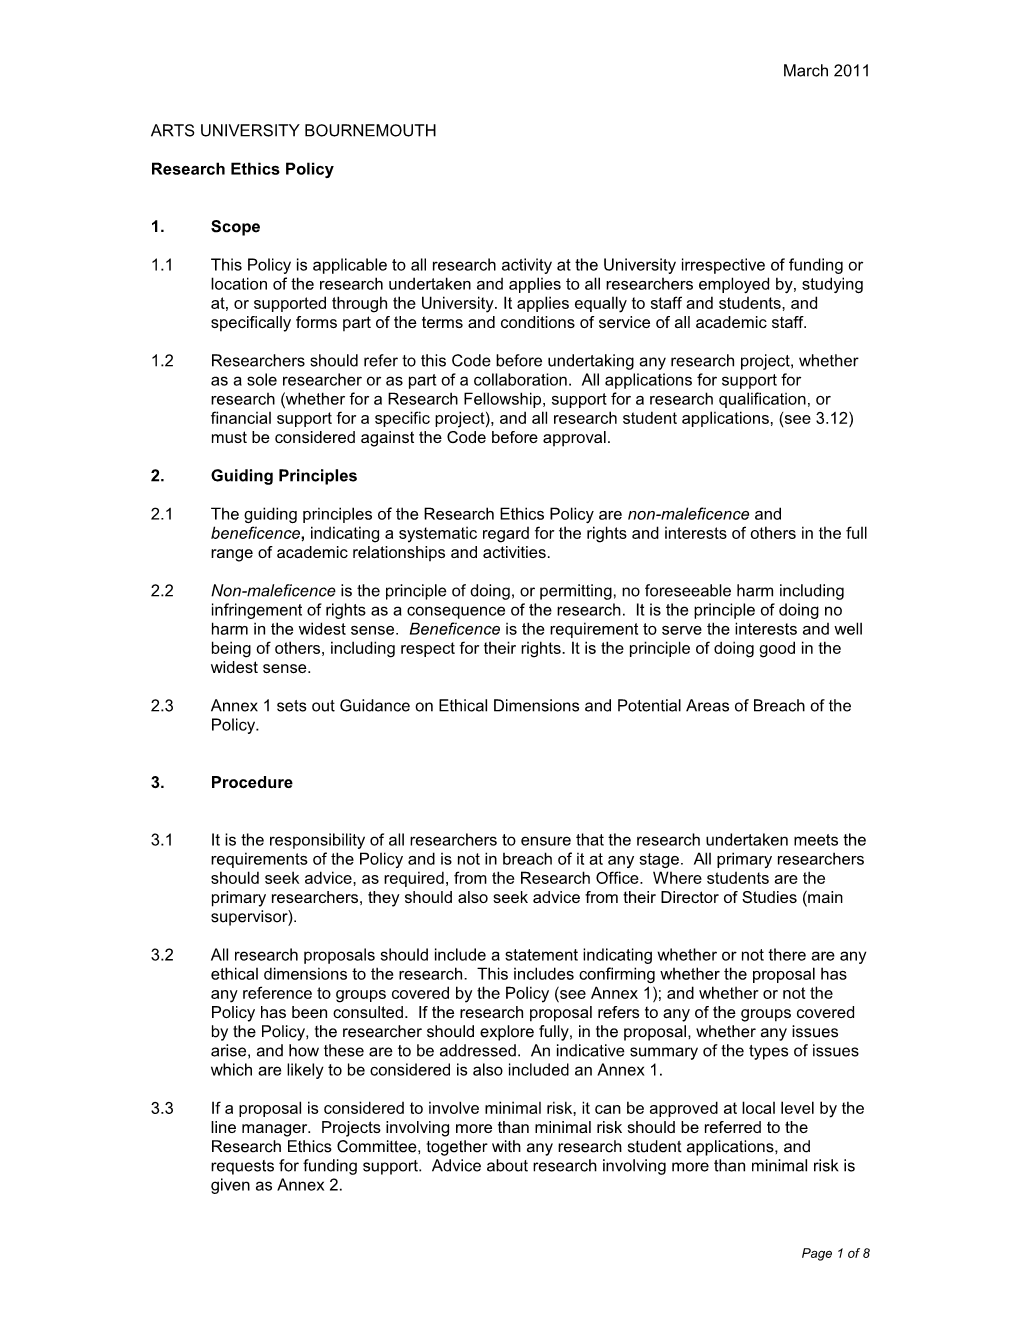 Research Ethics Policy 2011